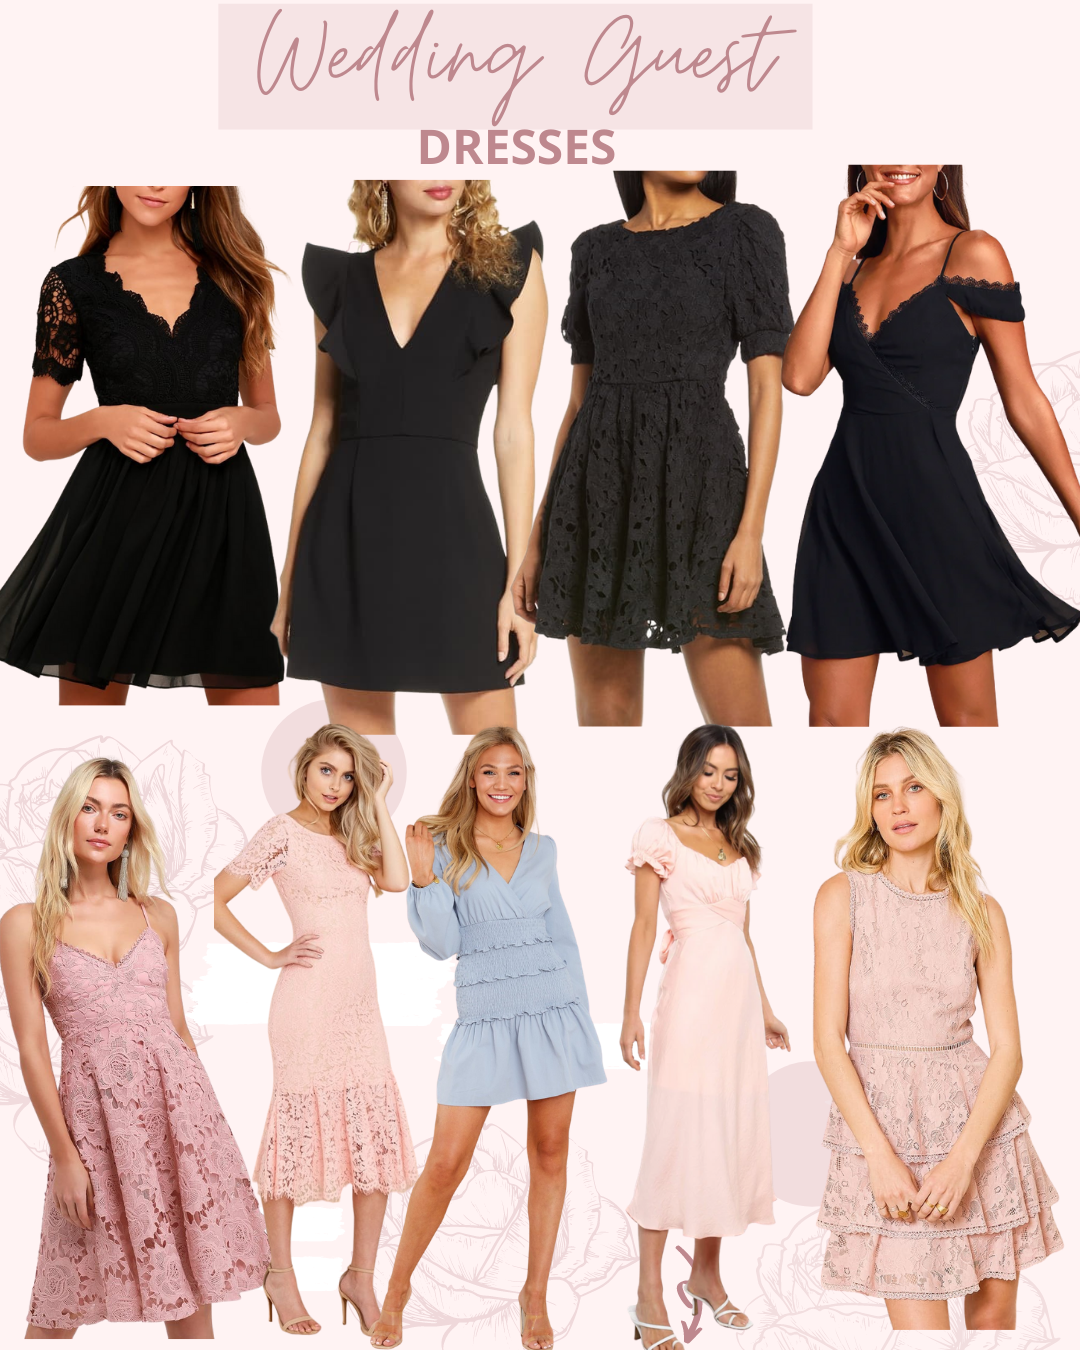 Spring Special Occasion Dress Guide - Lace & Lashes